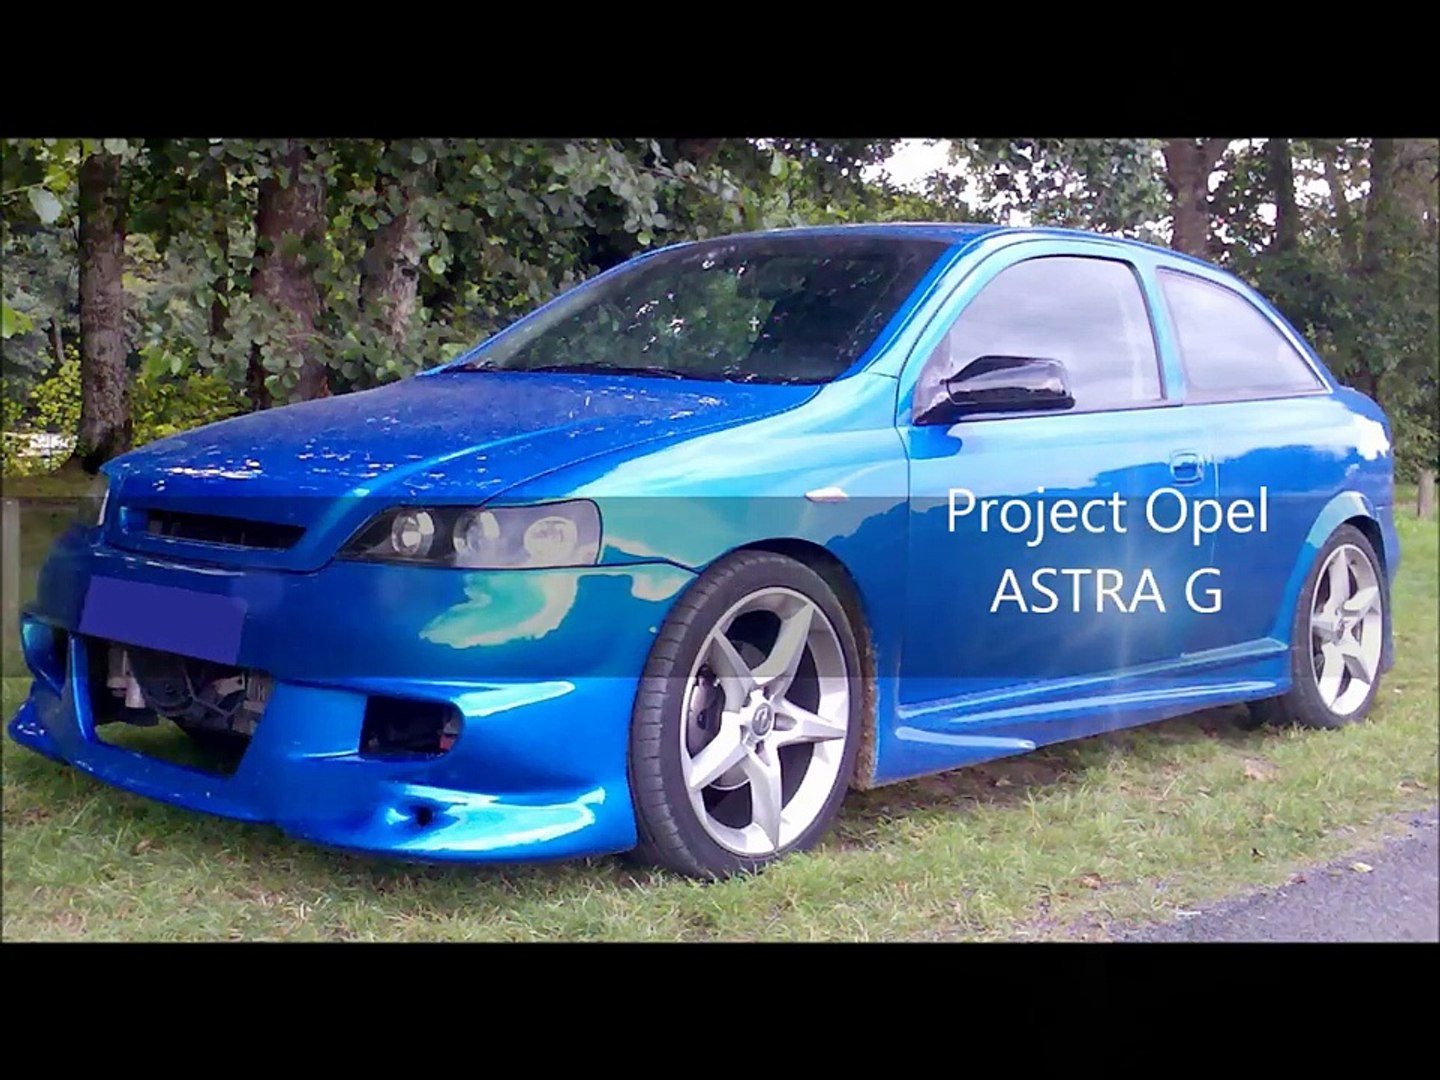 Project Opel Astra G tuning modified by Aieul T. Racing.english - Vídeo  Dailymotion